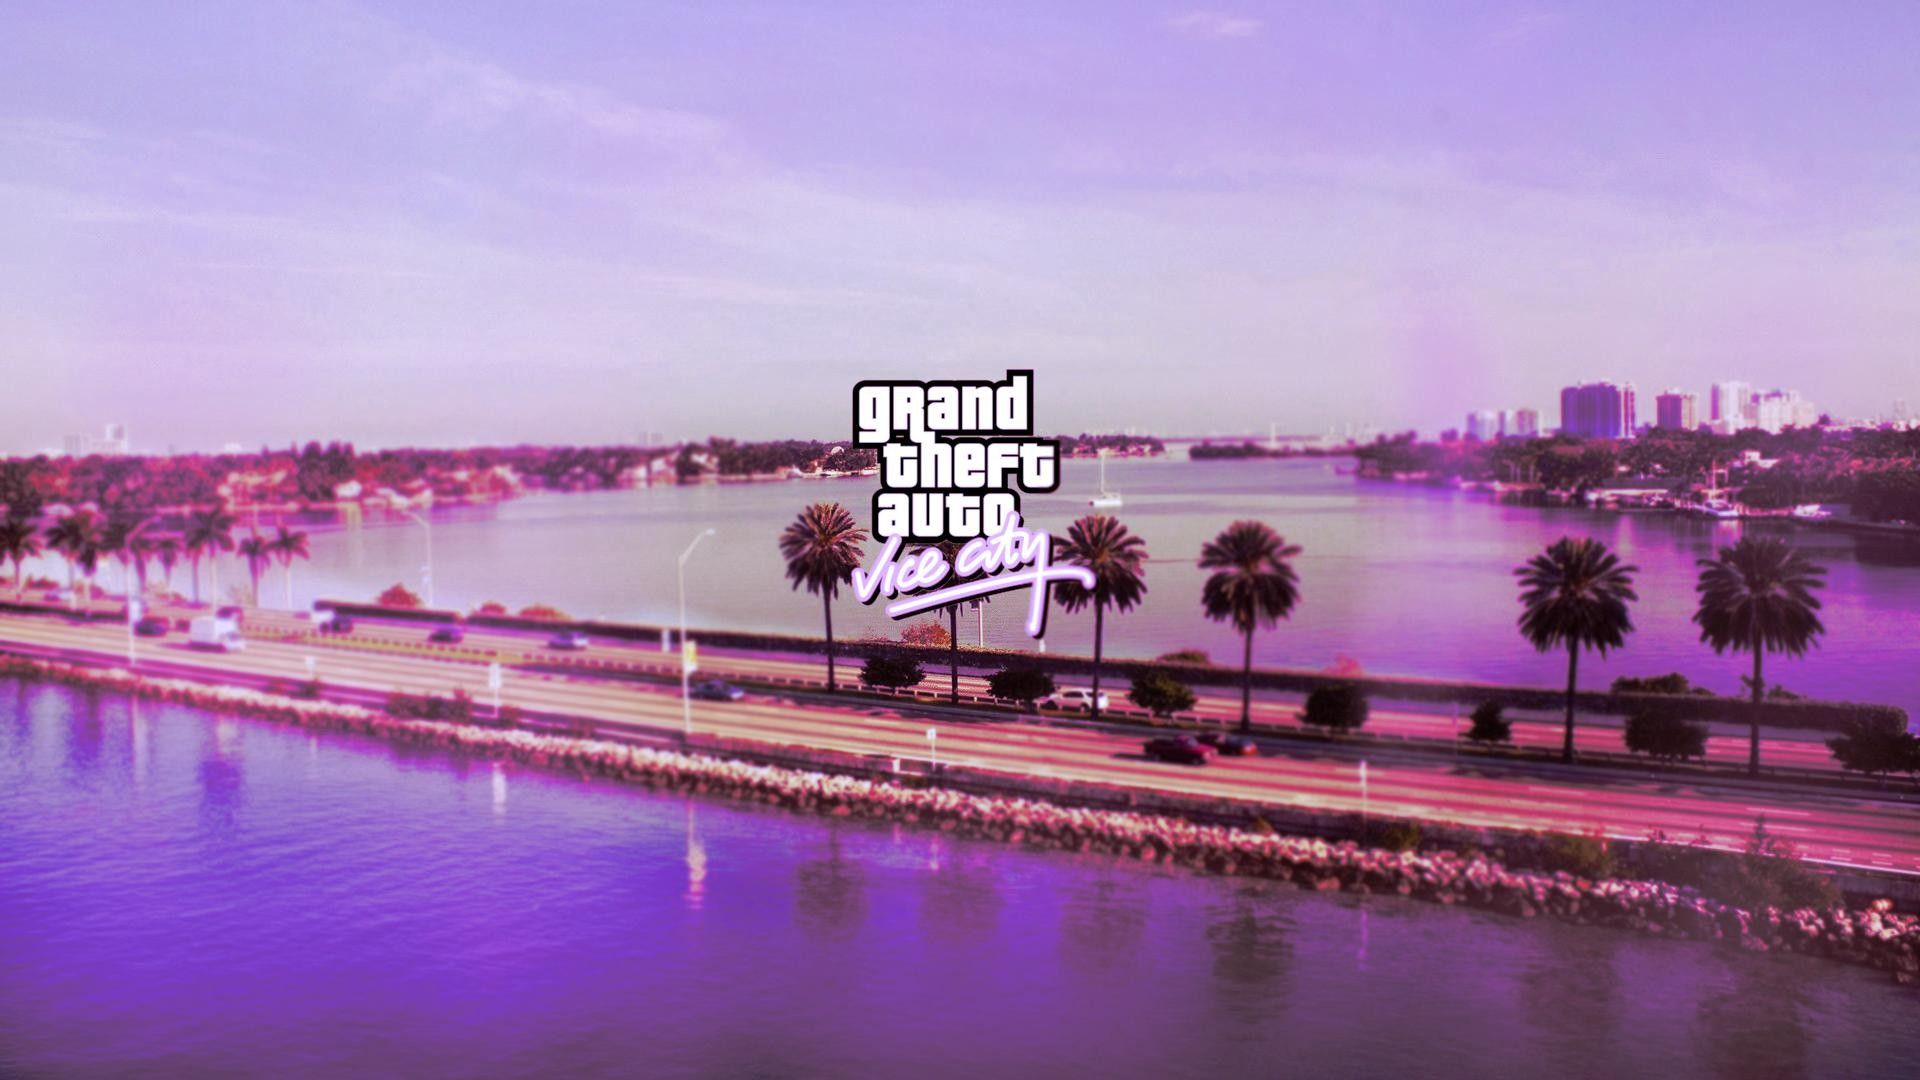 Grand Theft Auto Vice City, Road, Pink .wallup.net